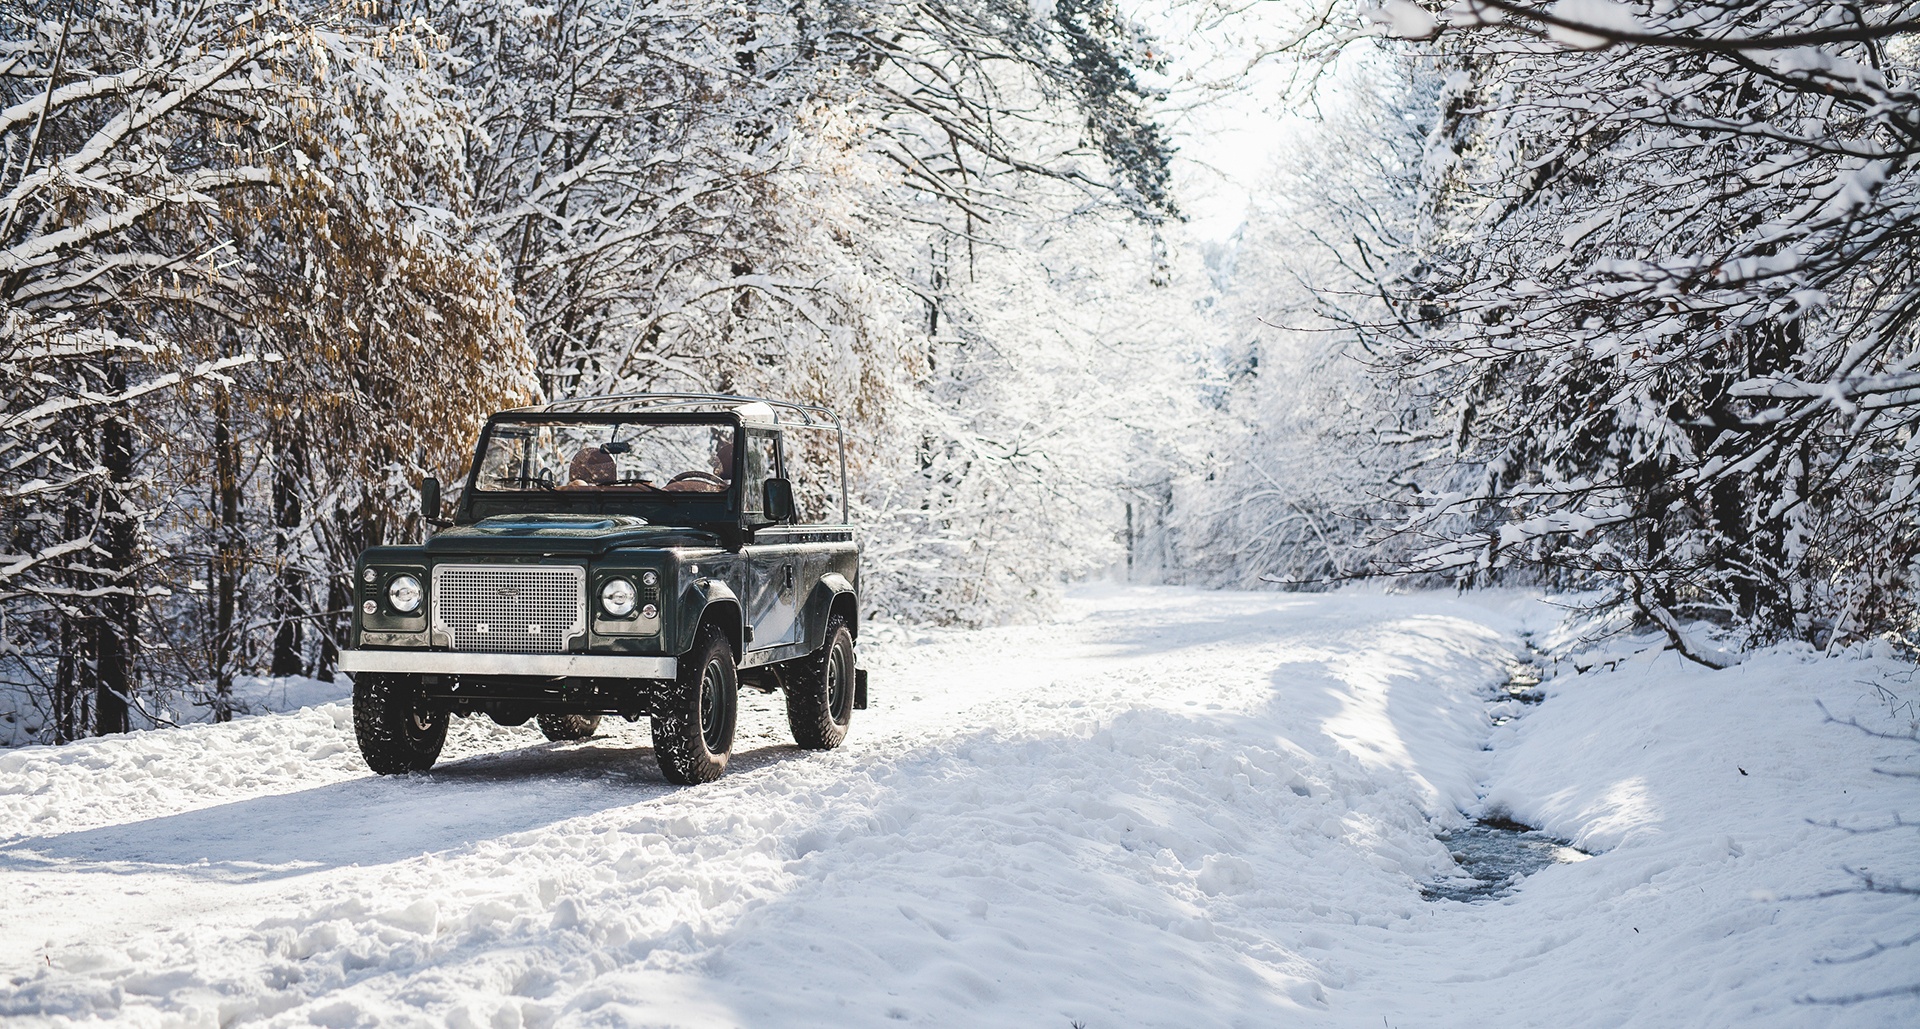 Take your valentine on an adventure in this Land Rover Defender